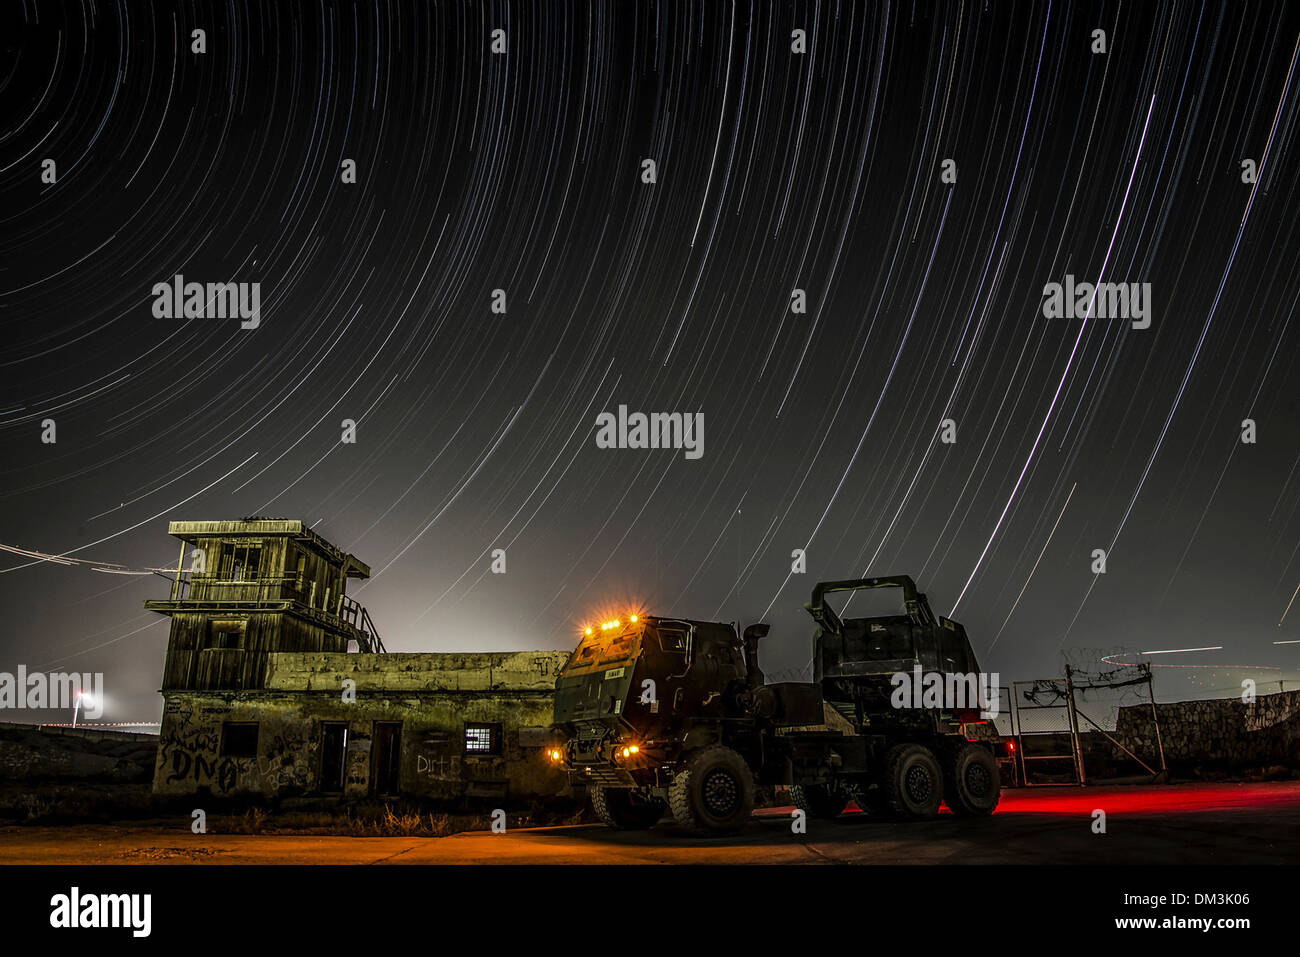 Stars trail across the Afghanistan night sky in a time-lapse photo with a High Mobility Artillery Rocket System at a undisclosed location in Afghanistan. Stock Photo